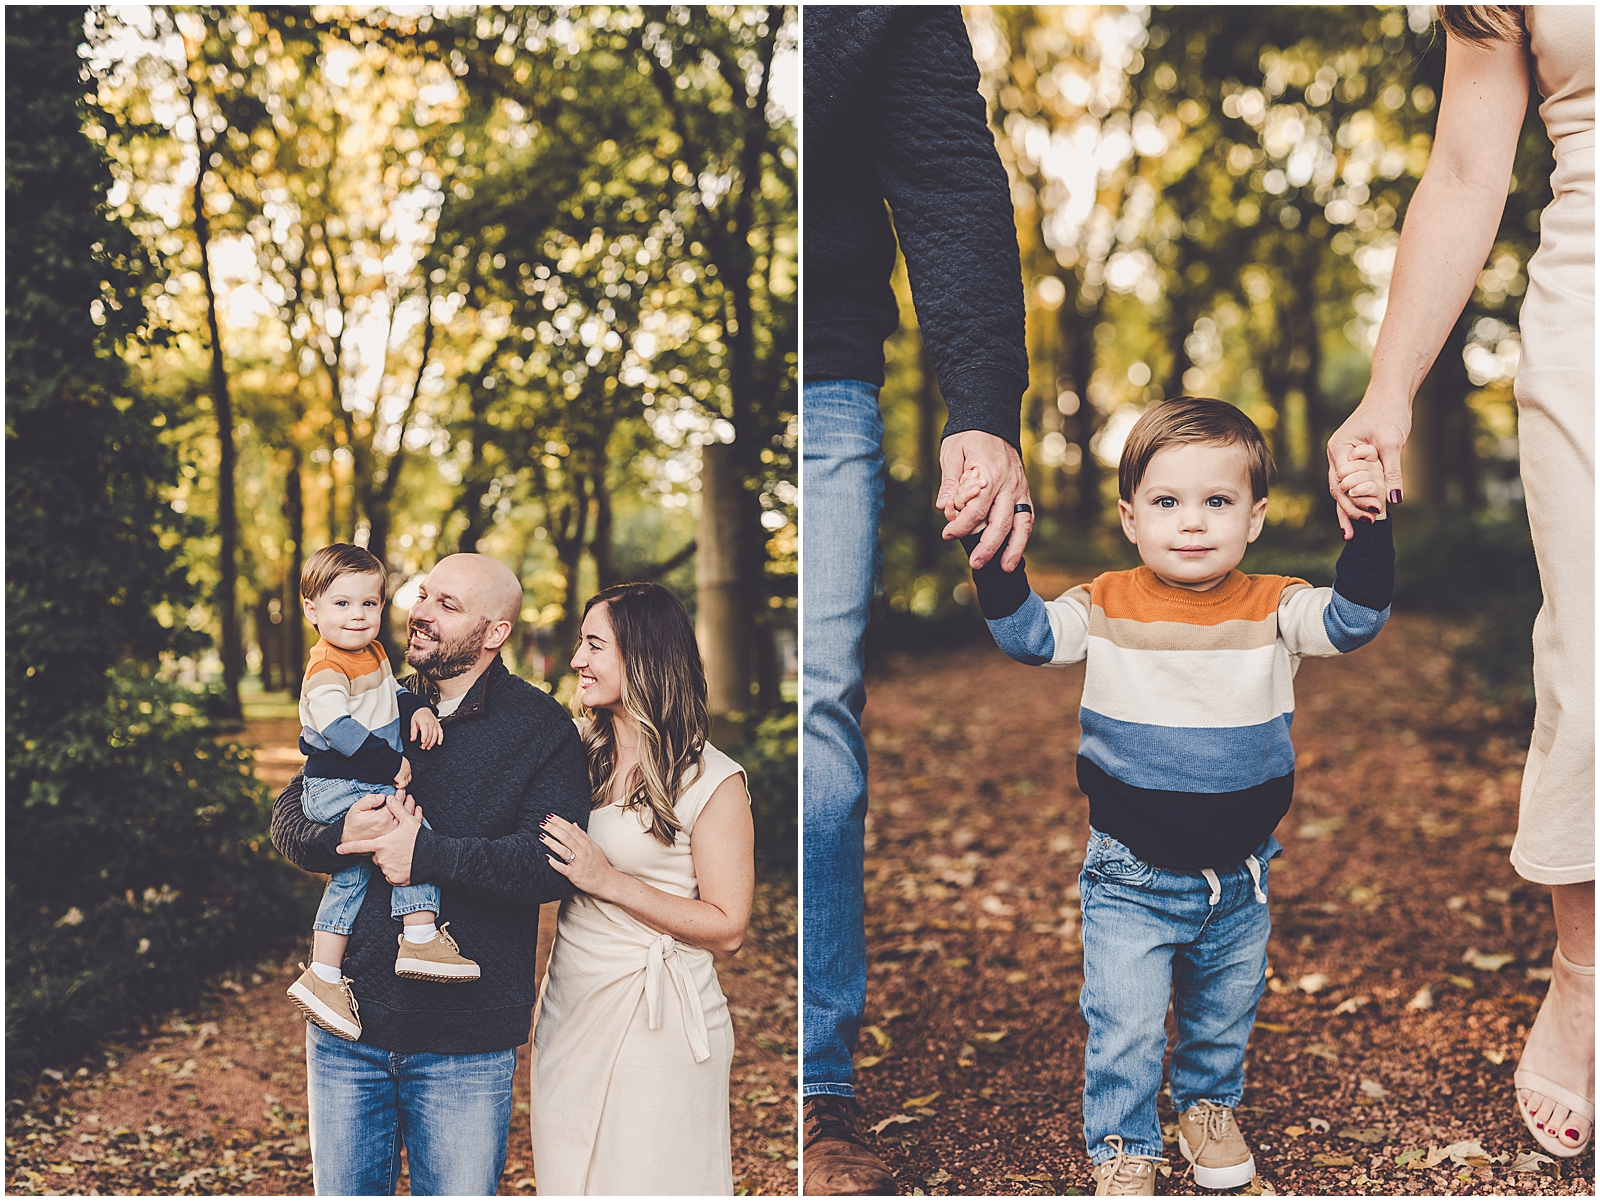 Fall mini sessions at Small Memorial Park in Kankakee with Bourbonnais and Kankakee County family photographer Kara Evans Photographer.